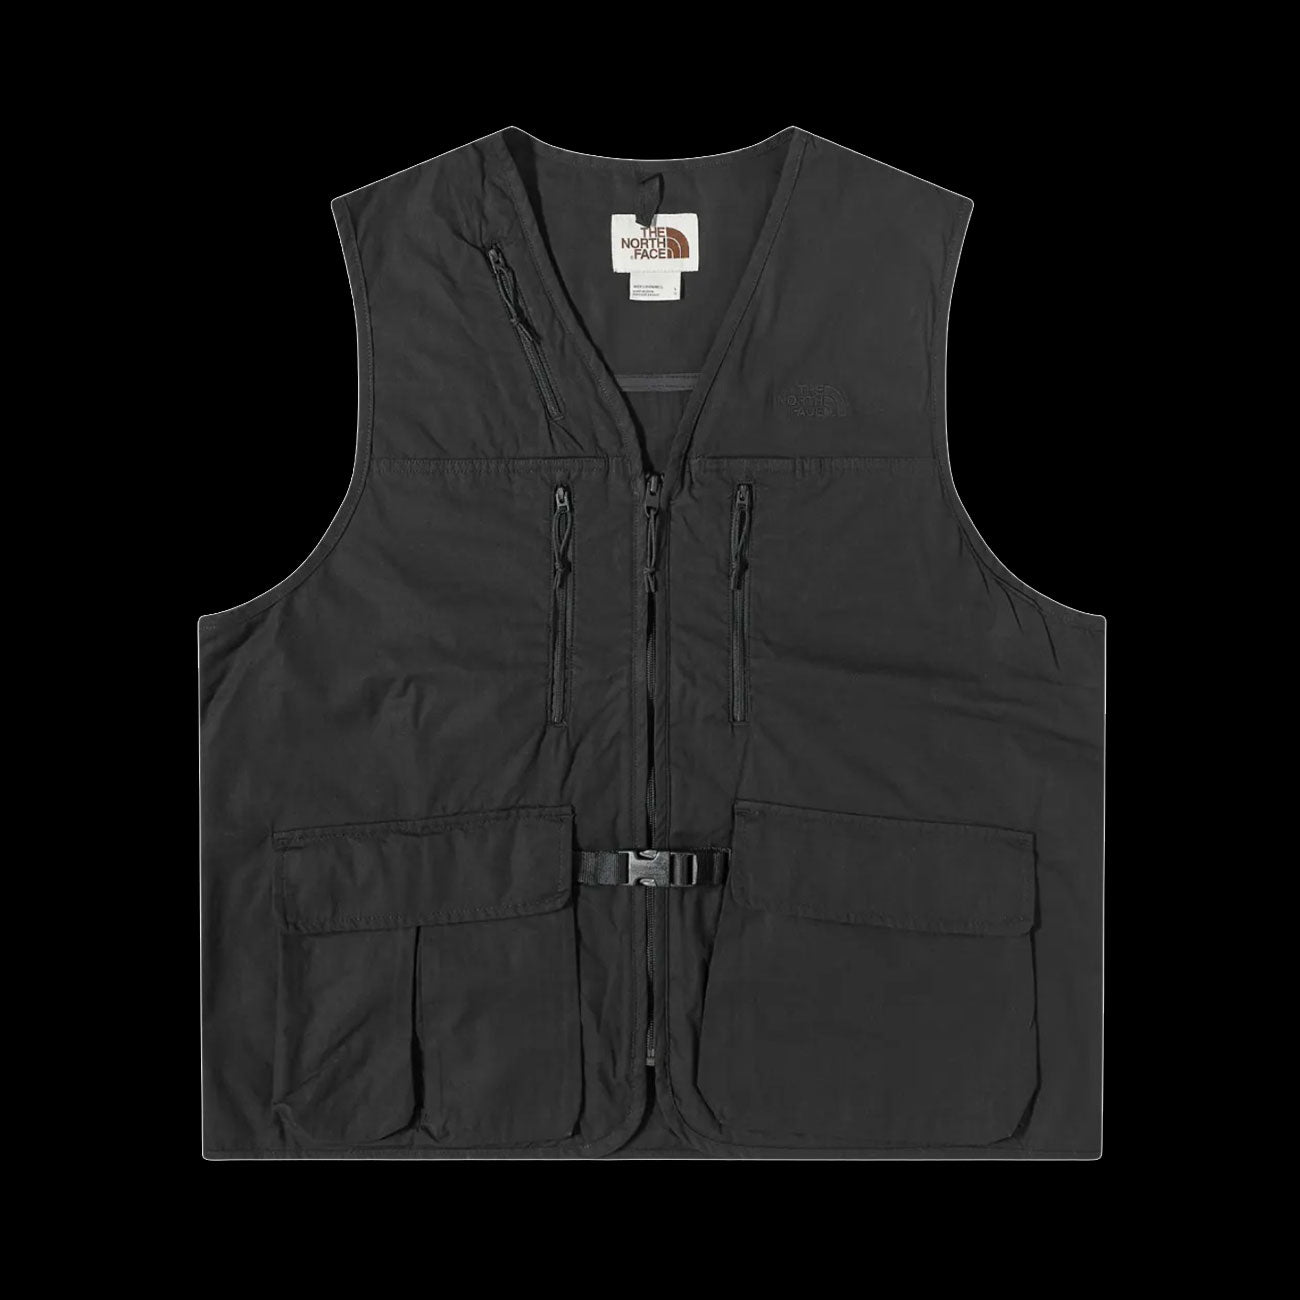 The North Face Utility Field Vest (Black) – Two 18